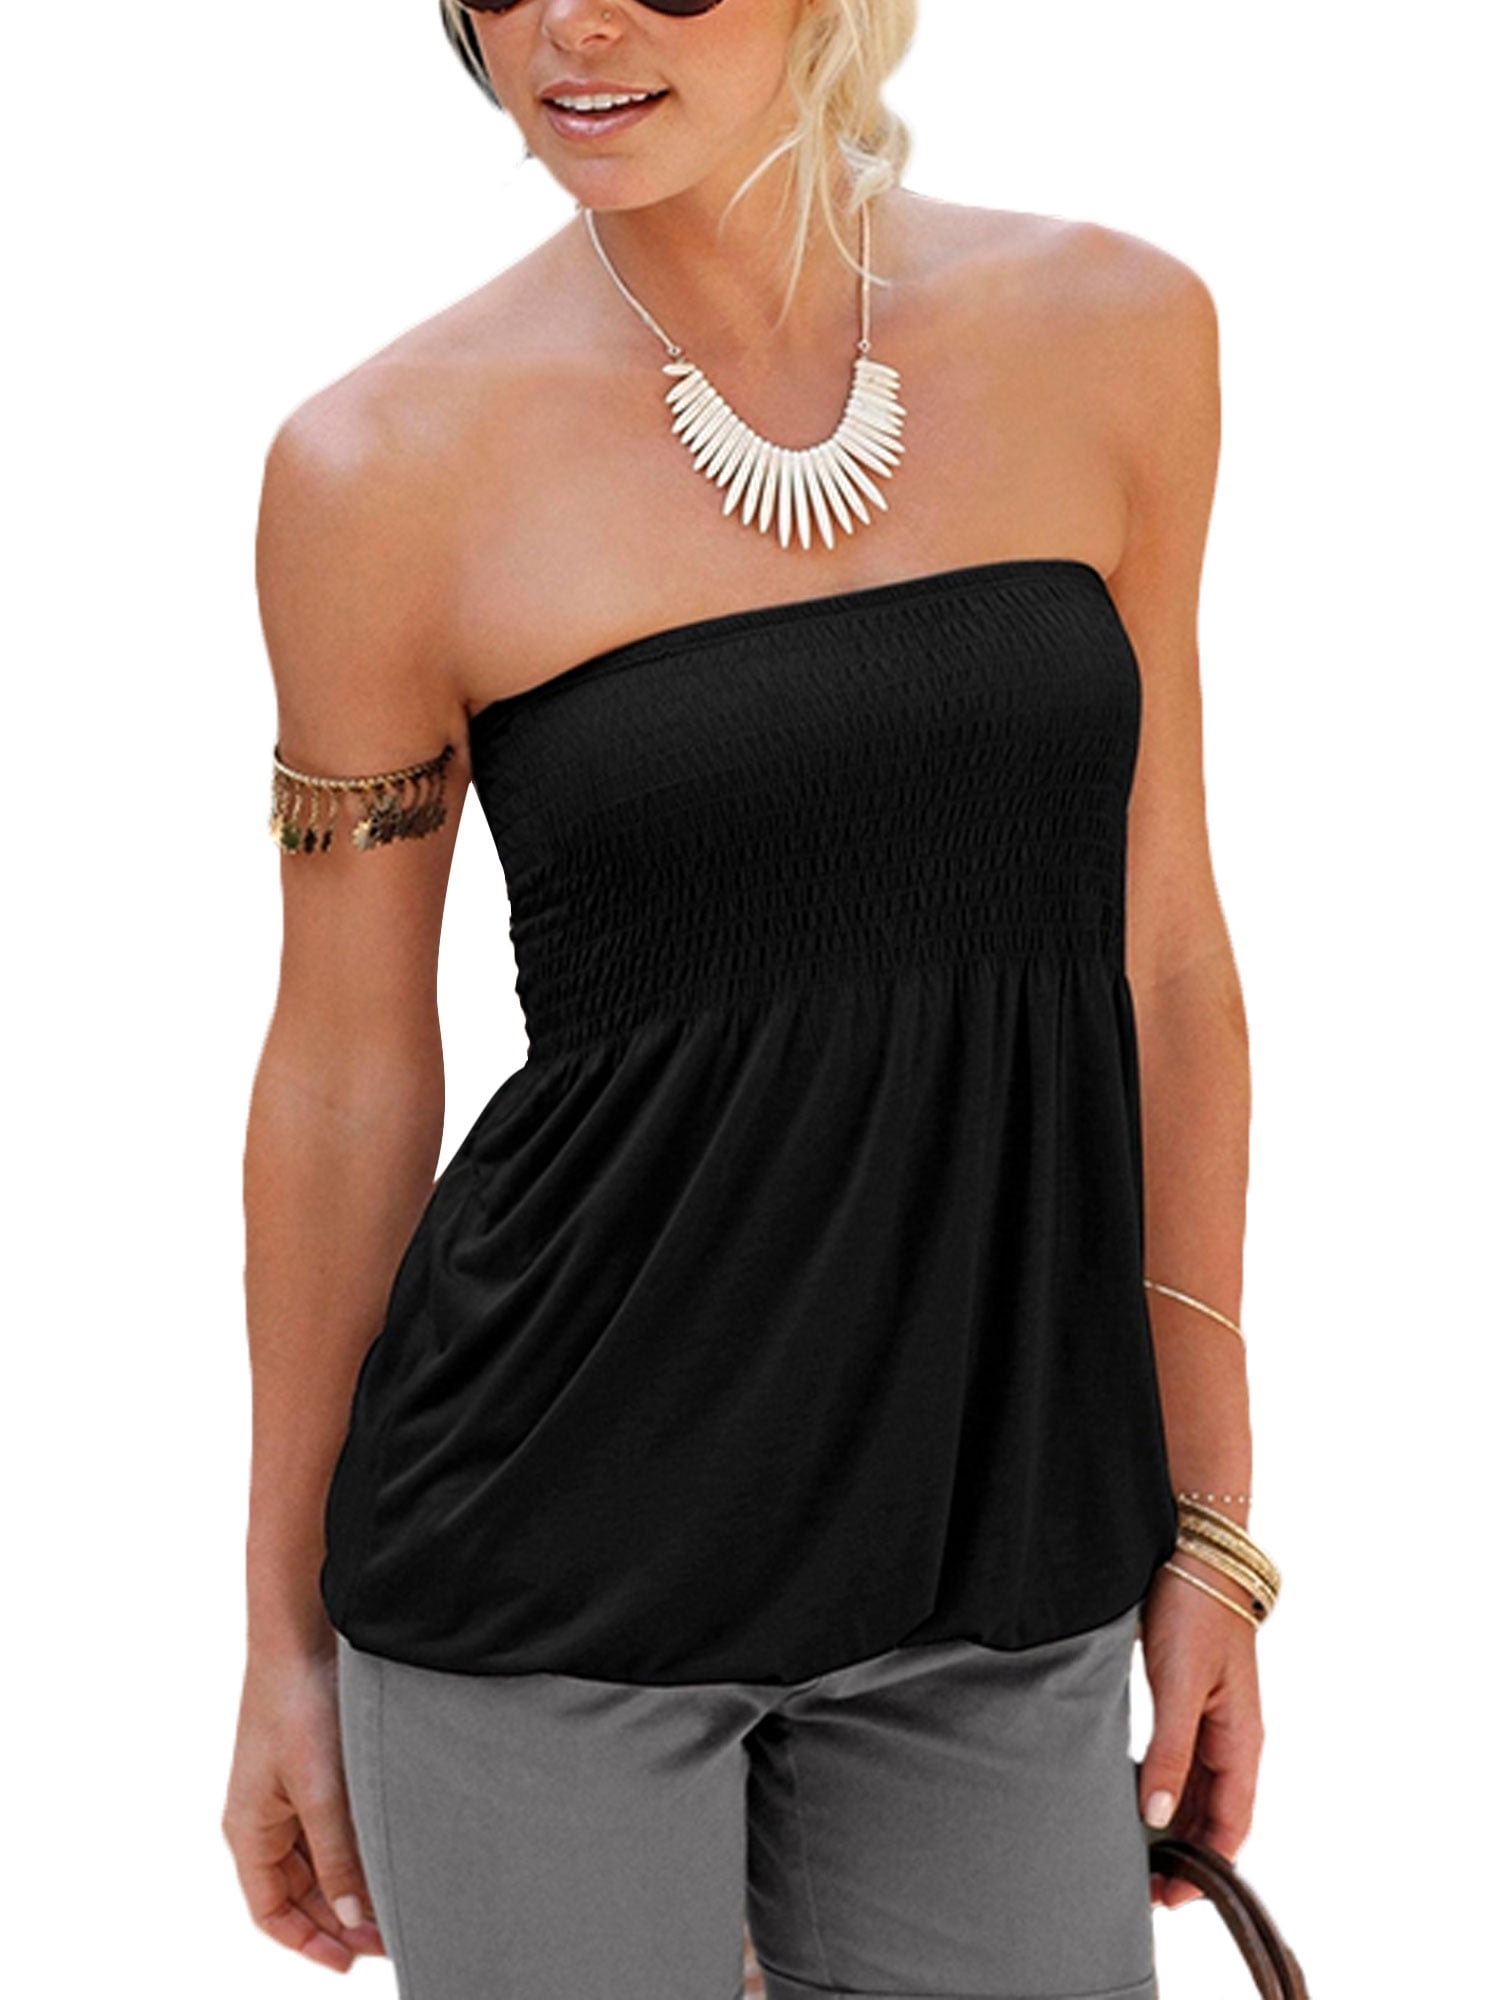 Womens Ladies Plain Ruched Gathered Strapless Bandeau Boob Tube Sleeveless Top 